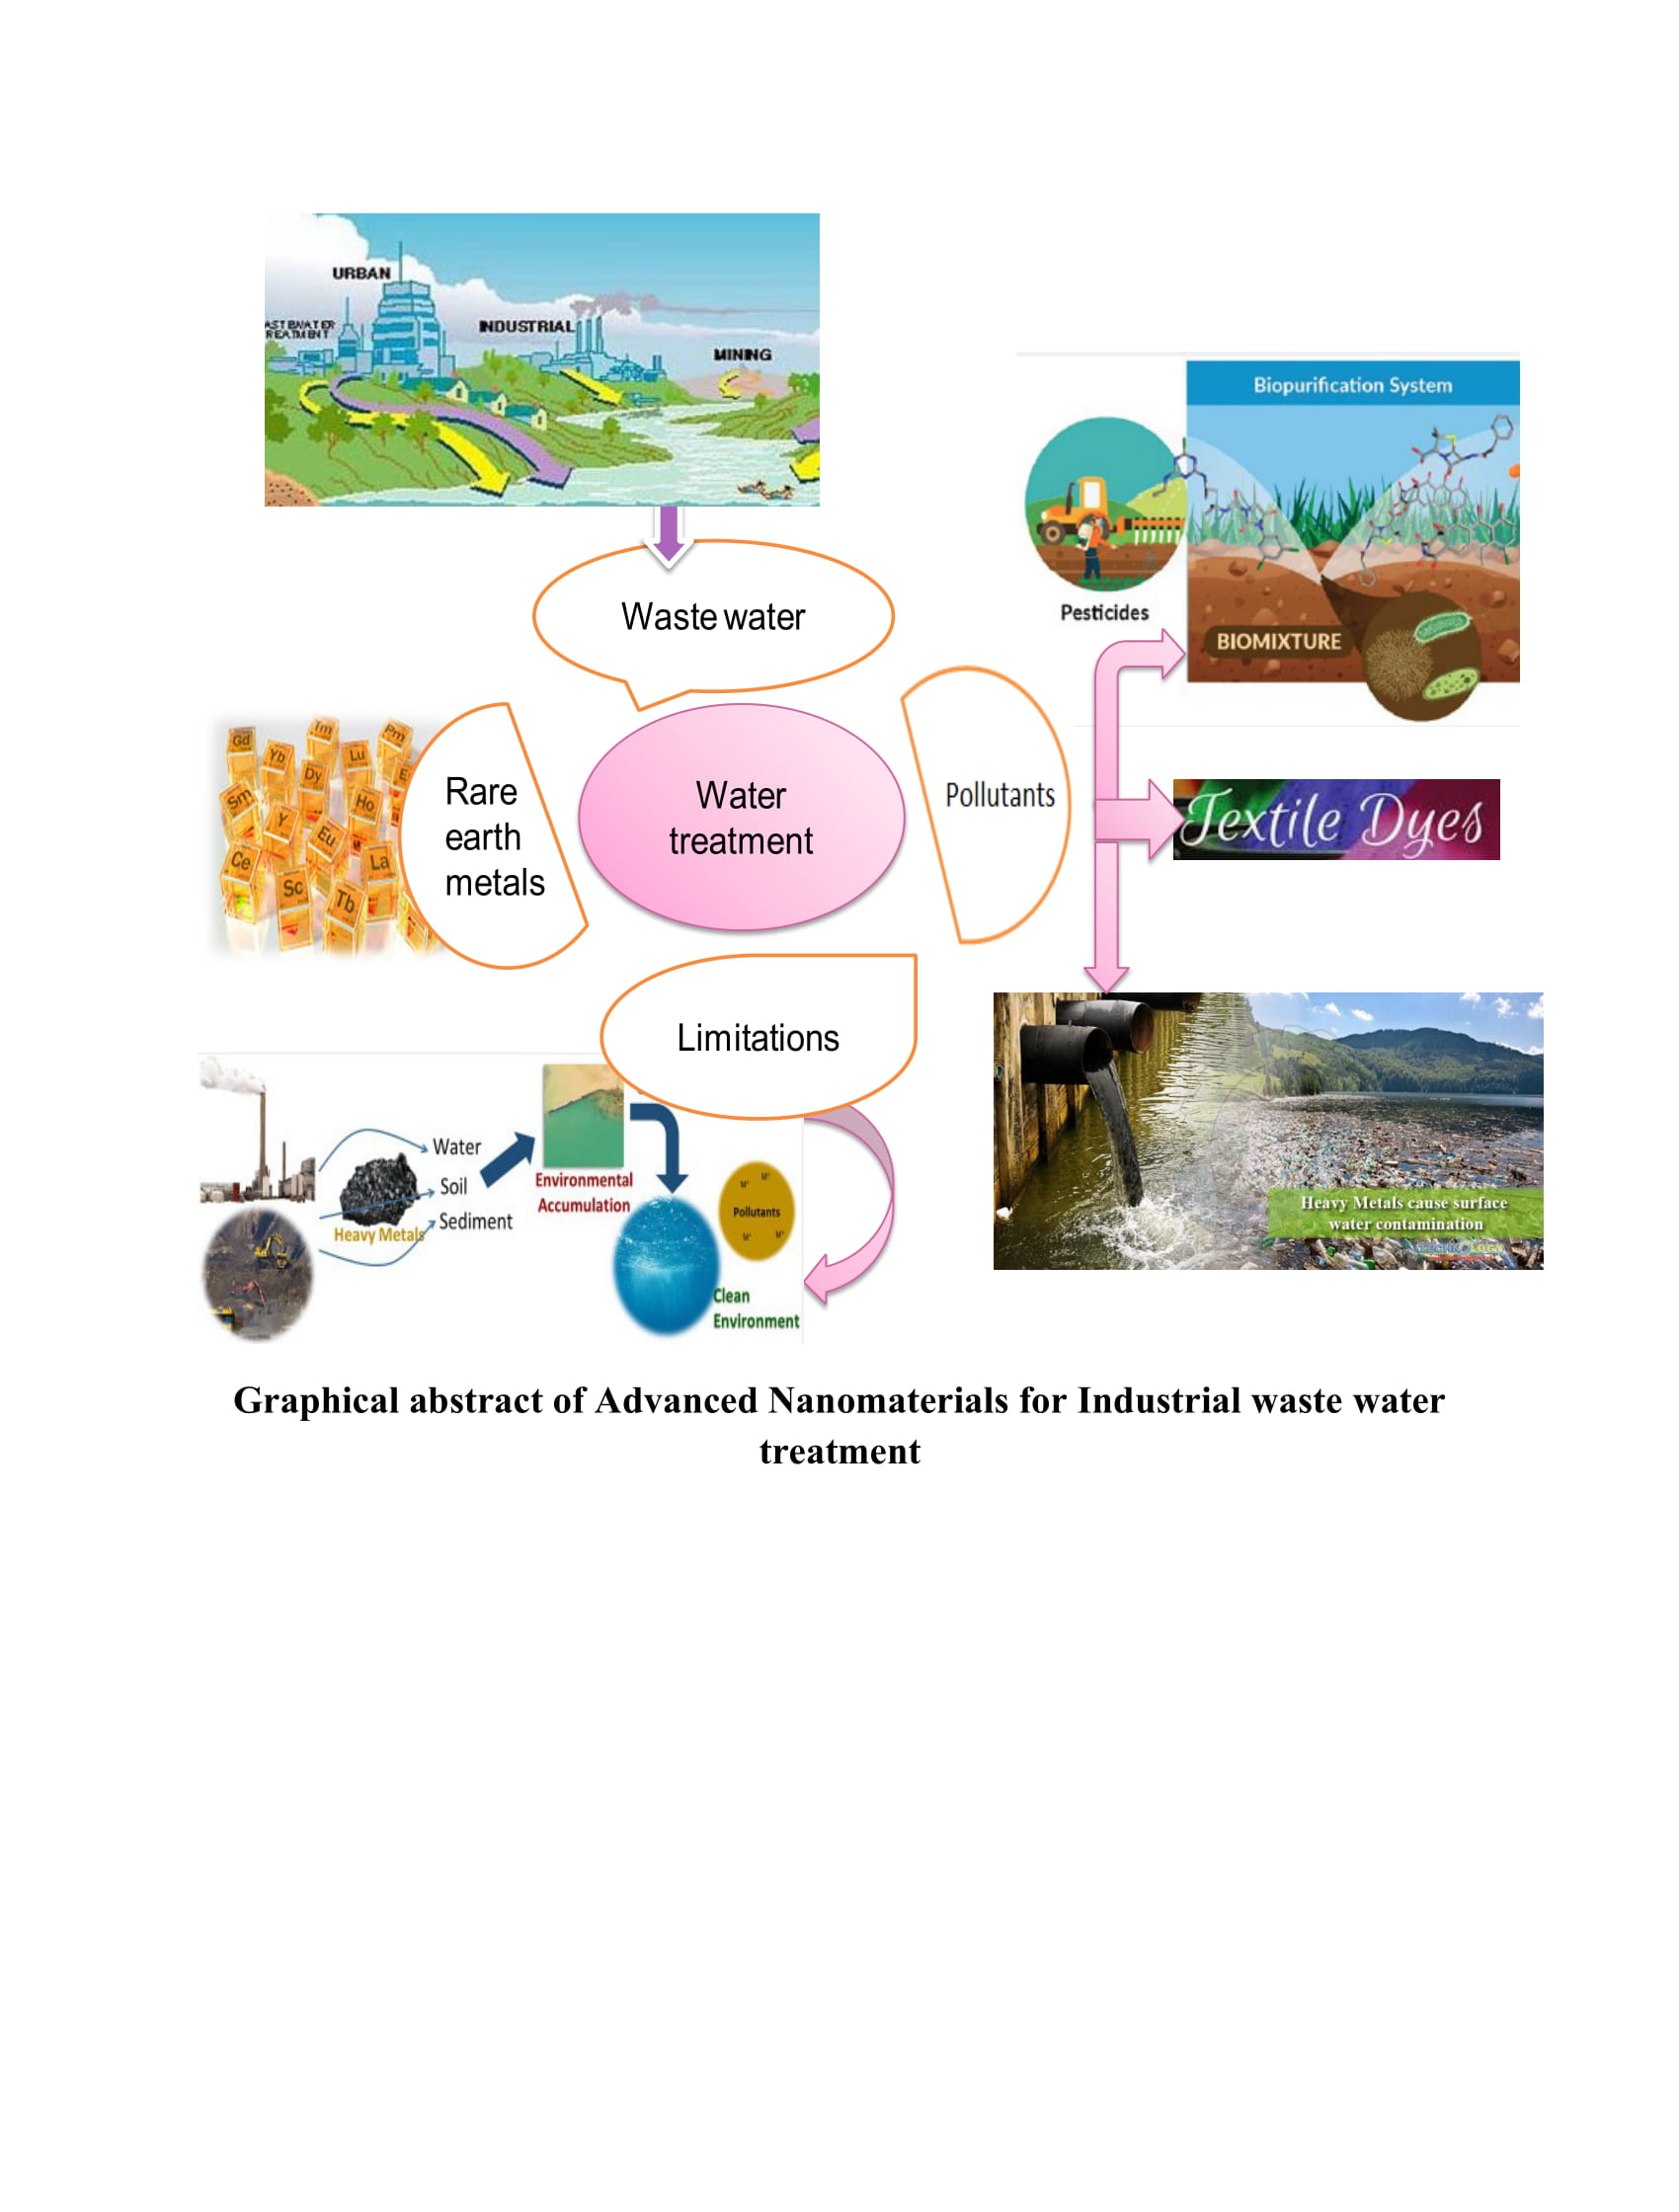 research paper on wastewater